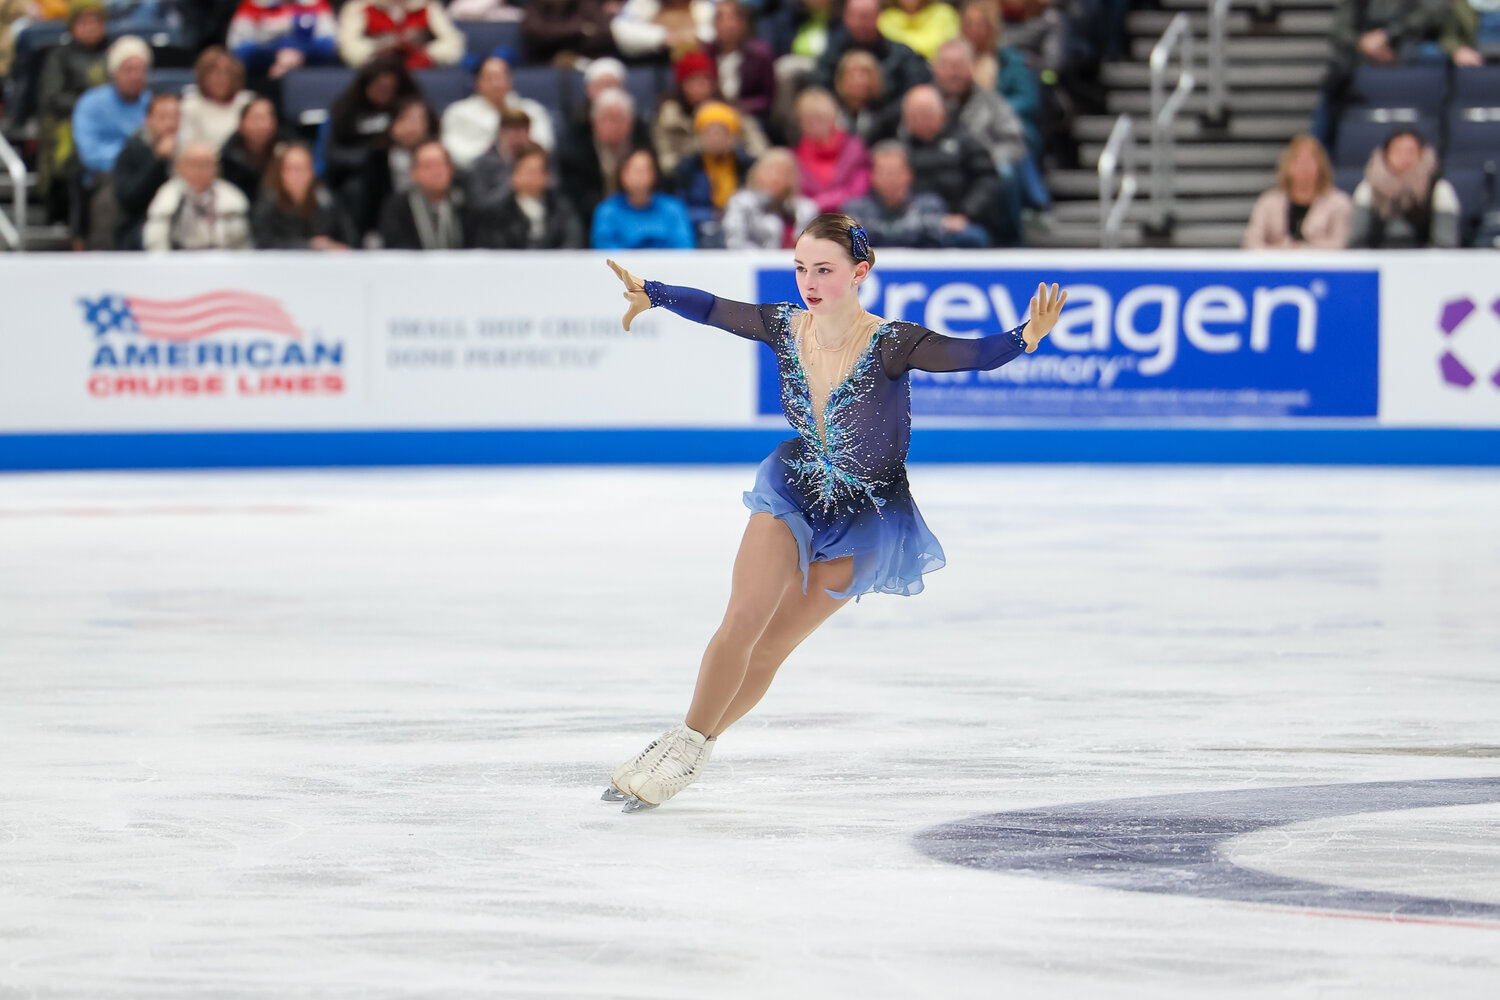 “At senior nationals, Sarah Everhardt finished third in the free skate competition with a total of 130.16 points. She was sixth in the short program with a score of 63.21 points.”



CREDIT: Melanie Heaney/U.S. Figure Skating